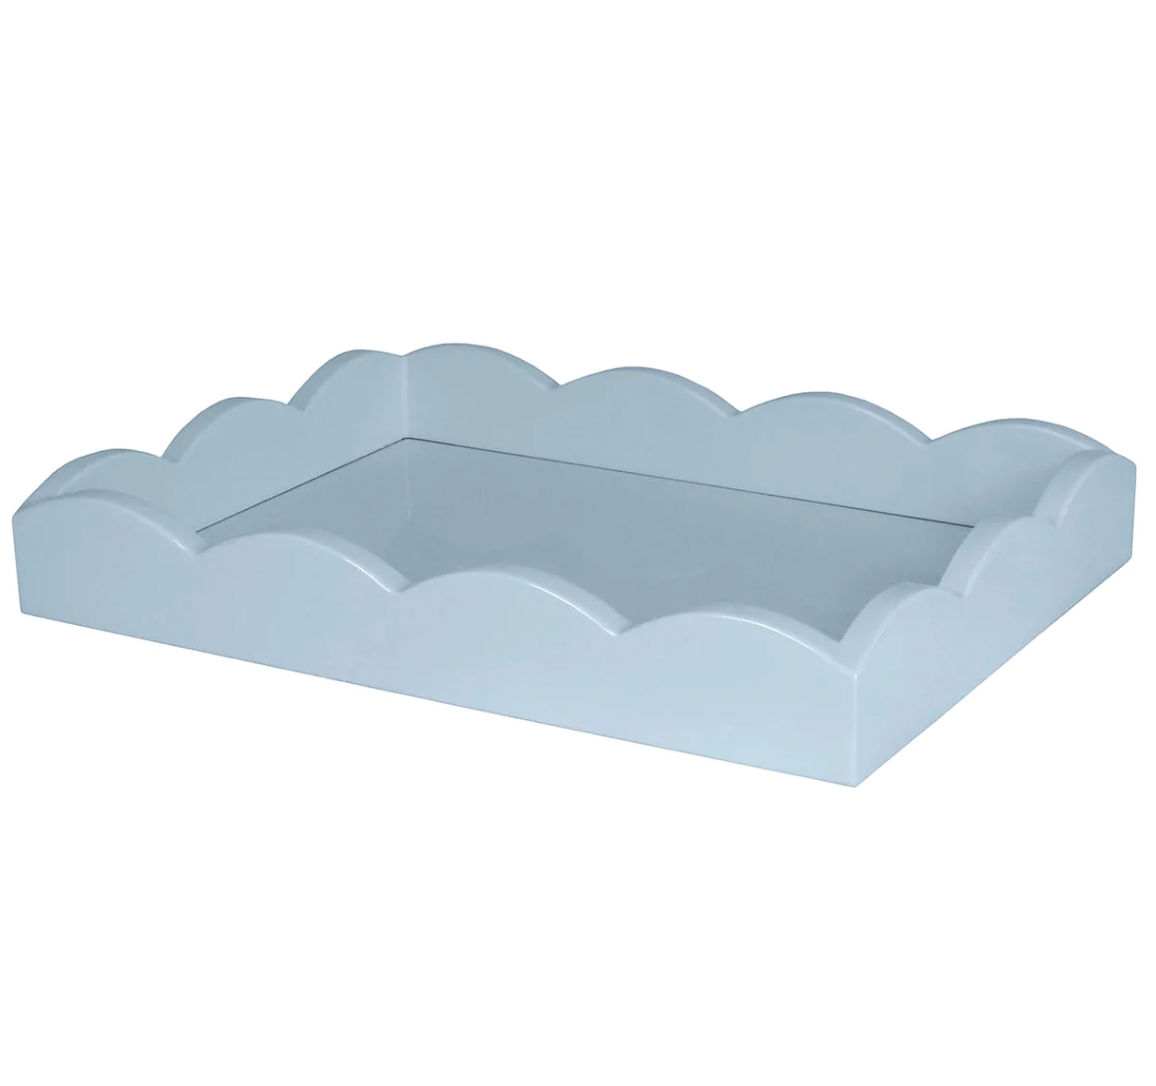 Addison Ross Small Scalloped Lacquered Tray – Pale Denim Blue – 11” x 8”